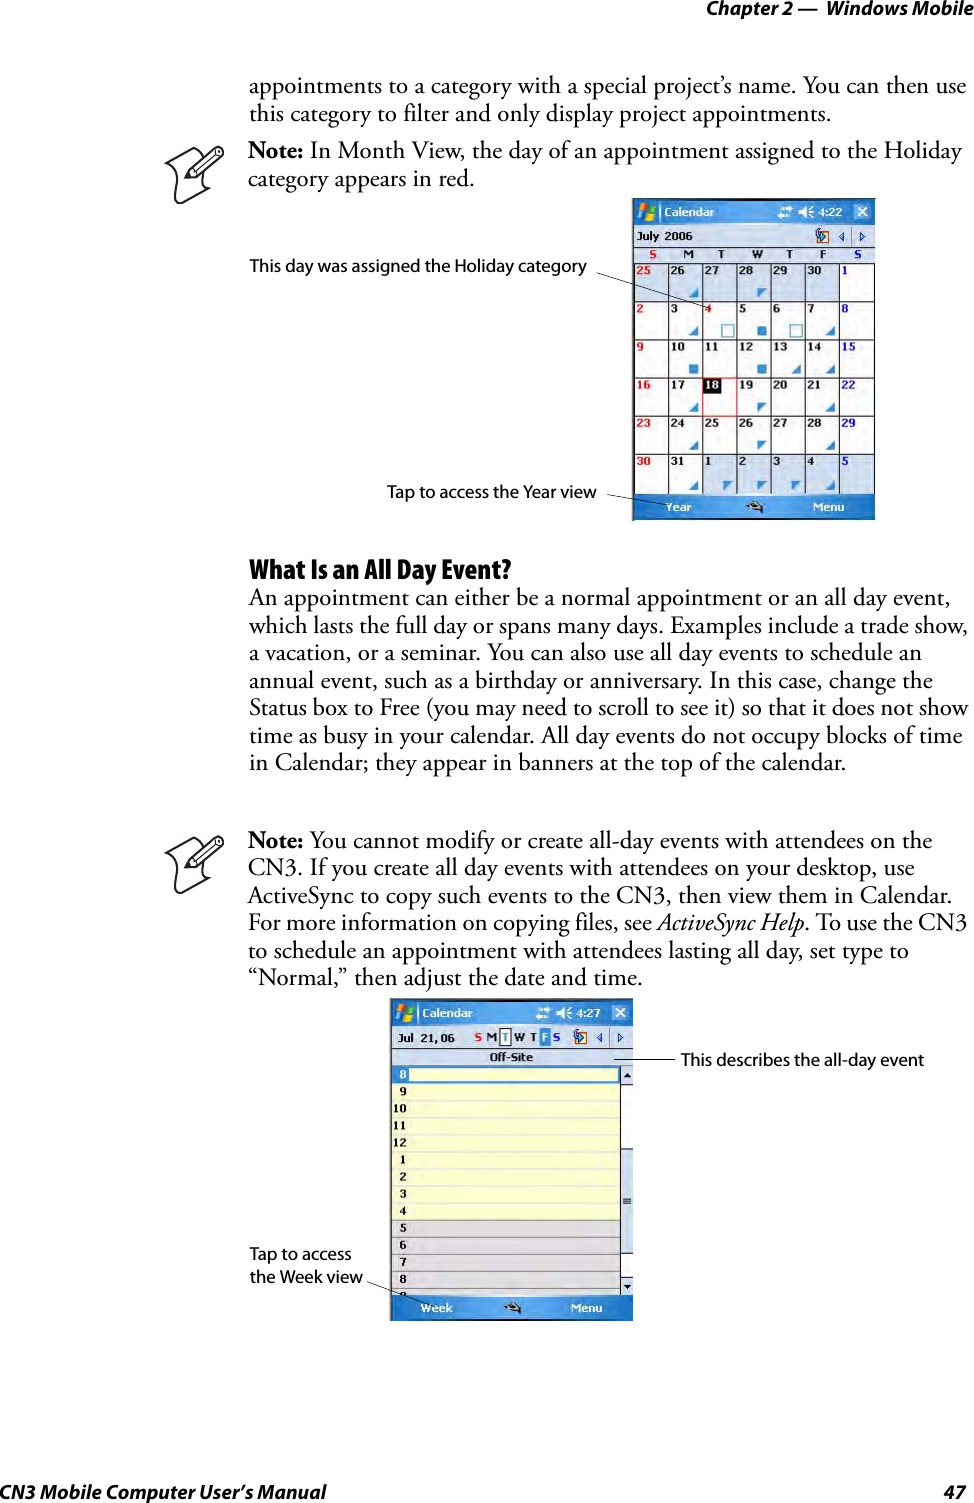 Chapter 2 —  Windows MobileCN3 Mobile Computer User’s Manual 47appointments to a category with a special project’s name. You can then use this category to filter and only display project appointments.What Is an All Day Event?An appointment can either be a normal appointment or an all day event, which lasts the full day or spans many days. Examples include a trade show, a vacation, or a seminar. You can also use all day events to schedule an annual event, such as a birthday or anniversary. In this case, change the Status box to Free (you may need to scroll to see it) so that it does not show time as busy in your calendar. All day events do not occupy blocks of time in Calendar; they appear in banners at the top of the calendar.Note: In Month View, the day of an appointment assigned to the Holiday category appears in red.Note: You cannot modify or create all-day events with attendees on the CN3. If you create all day events with attendees on your desktop, use ActiveSync to copy such events to the CN3, then view them in Calendar. For more information on copying files, see ActiveSync Help. To use the CN3 to schedule an appointment with attendees lasting all day, set type to “Normal,” then adjust the date and time.This day was assigned the Holiday categoryTap to access the Year viewThis describes the all-day eventTap to access the Week view